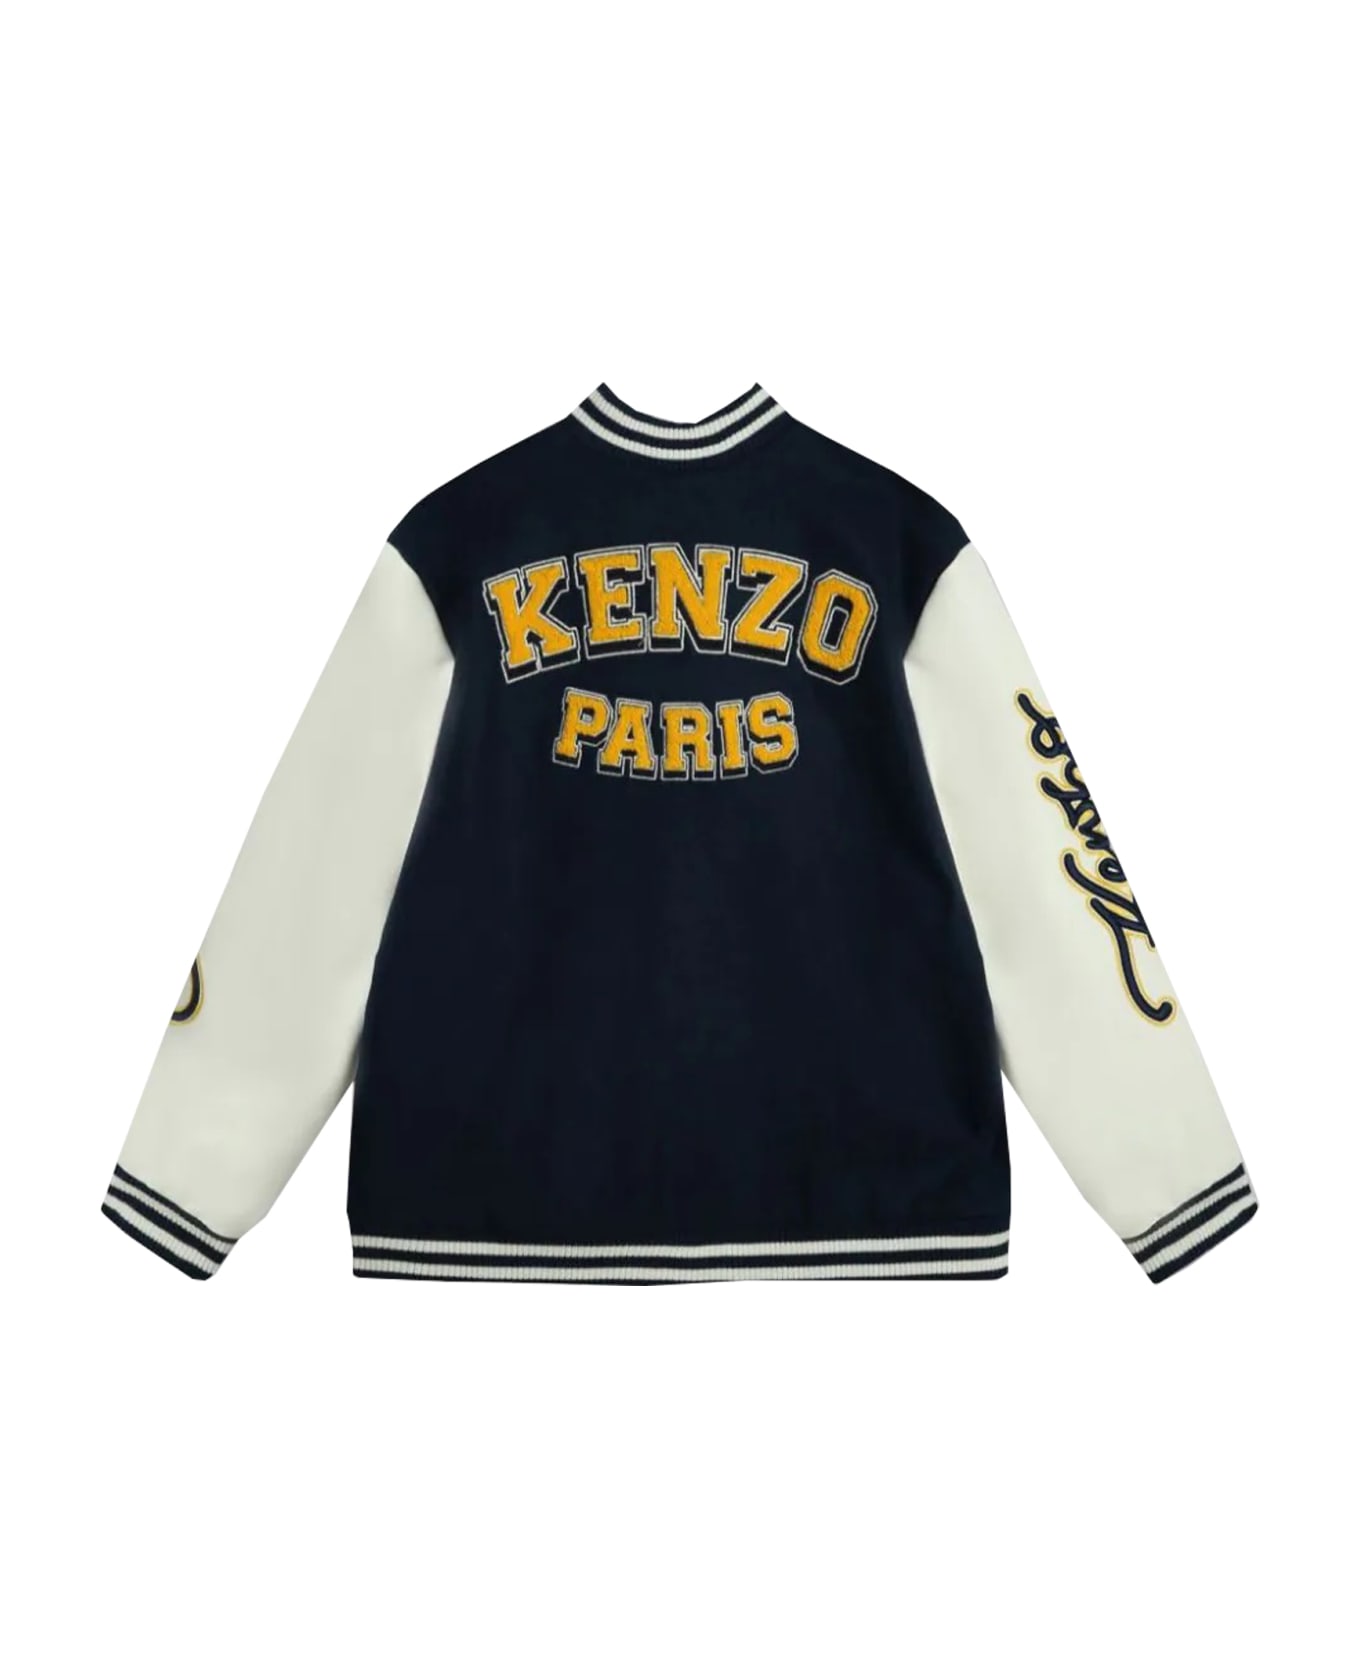 Kenzo Kids Bi-material Bomber Jacket Embroidered "campus" - Blue